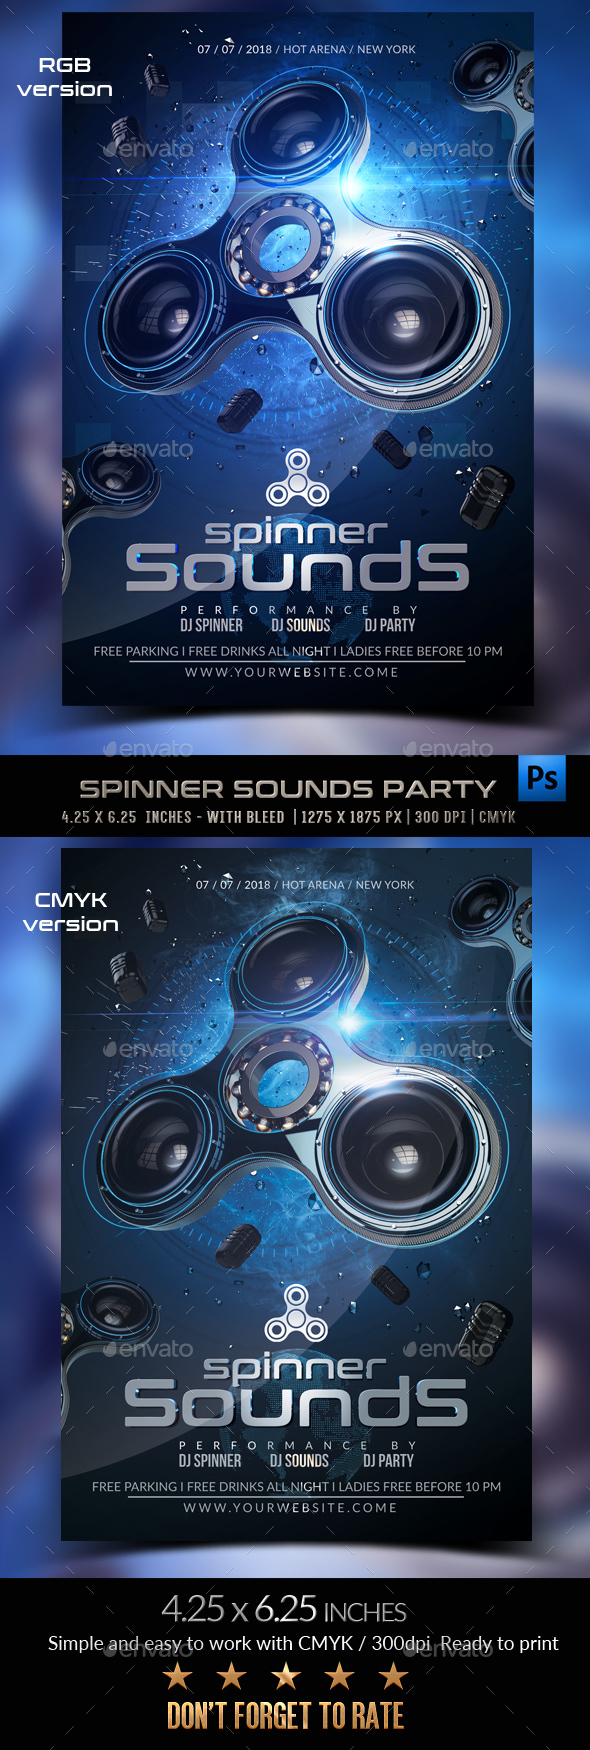 GraphicRiver Spinner Sounds Party Flyer 20288928